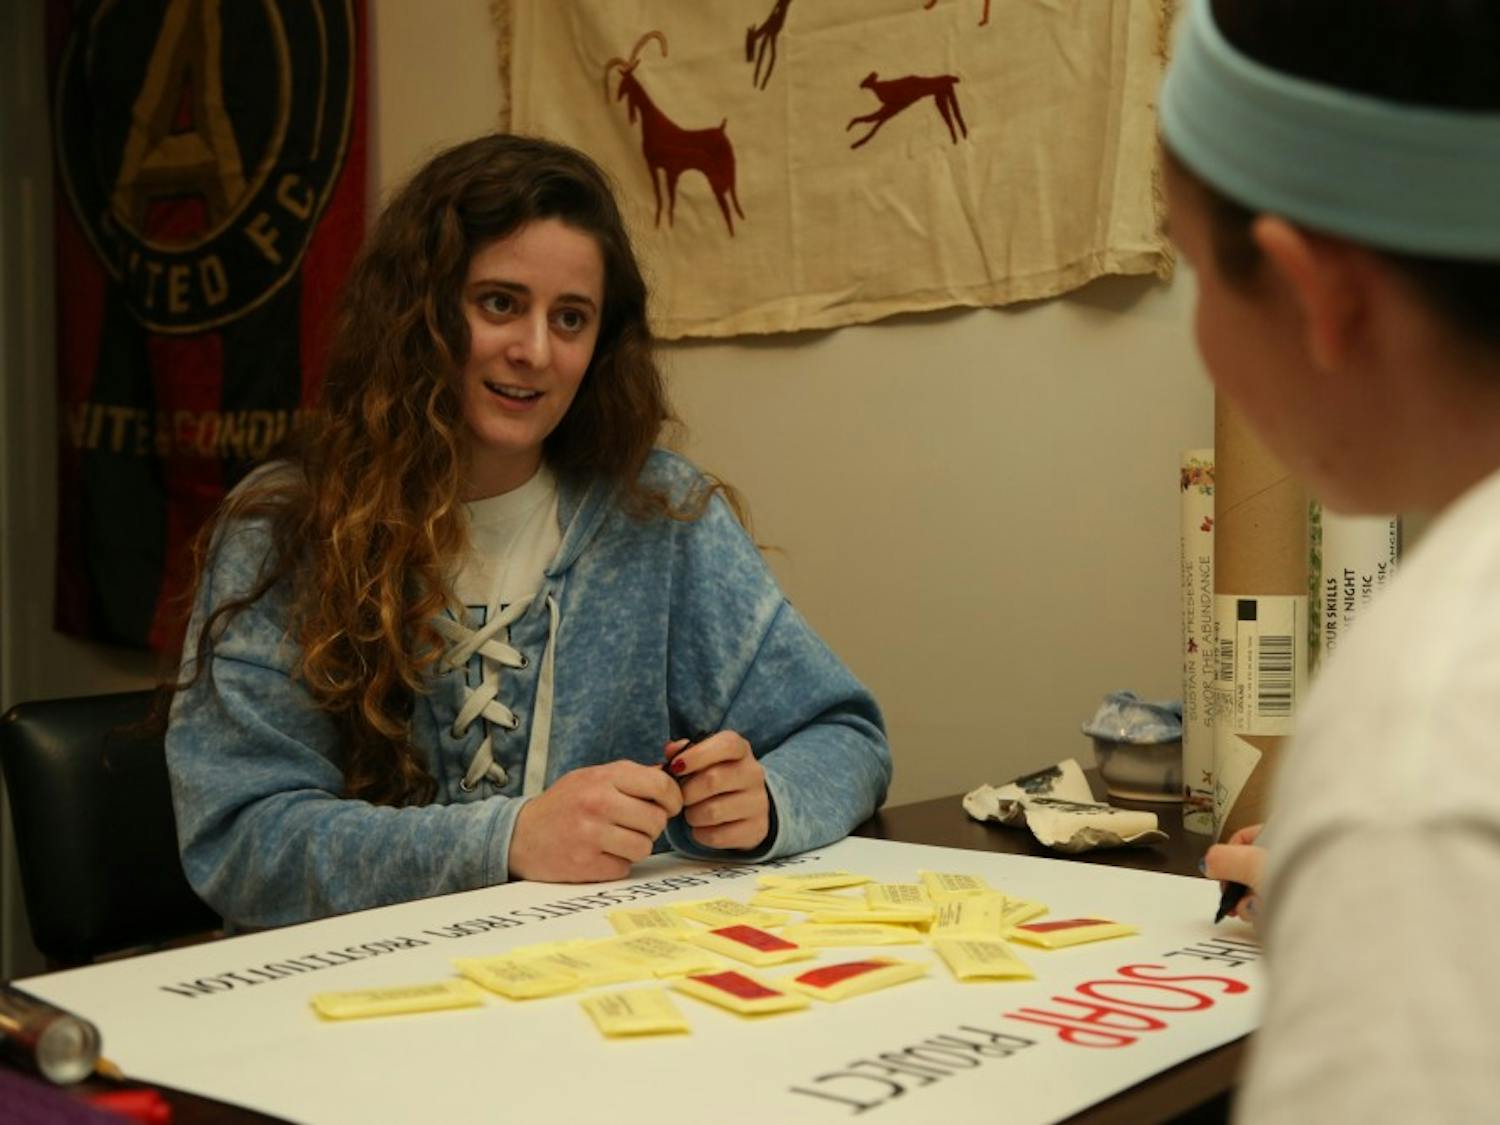 (From left to right) Kara Cody, a senior exercise and sport science and psychology major, and Jaycee Reilly, a senior exercise and sports science and romance languages double major, prepare a poster board on Tuesday, February 5, 2019 for the SOAP project event on Friday, February 8, 2019 in the Pit. The SOAP project raises awareness about human trafficking. The event will encourage students to place labels with a human trafficking hotline on bars of soap. The soaps are then placed in hotels to help victims get help.  